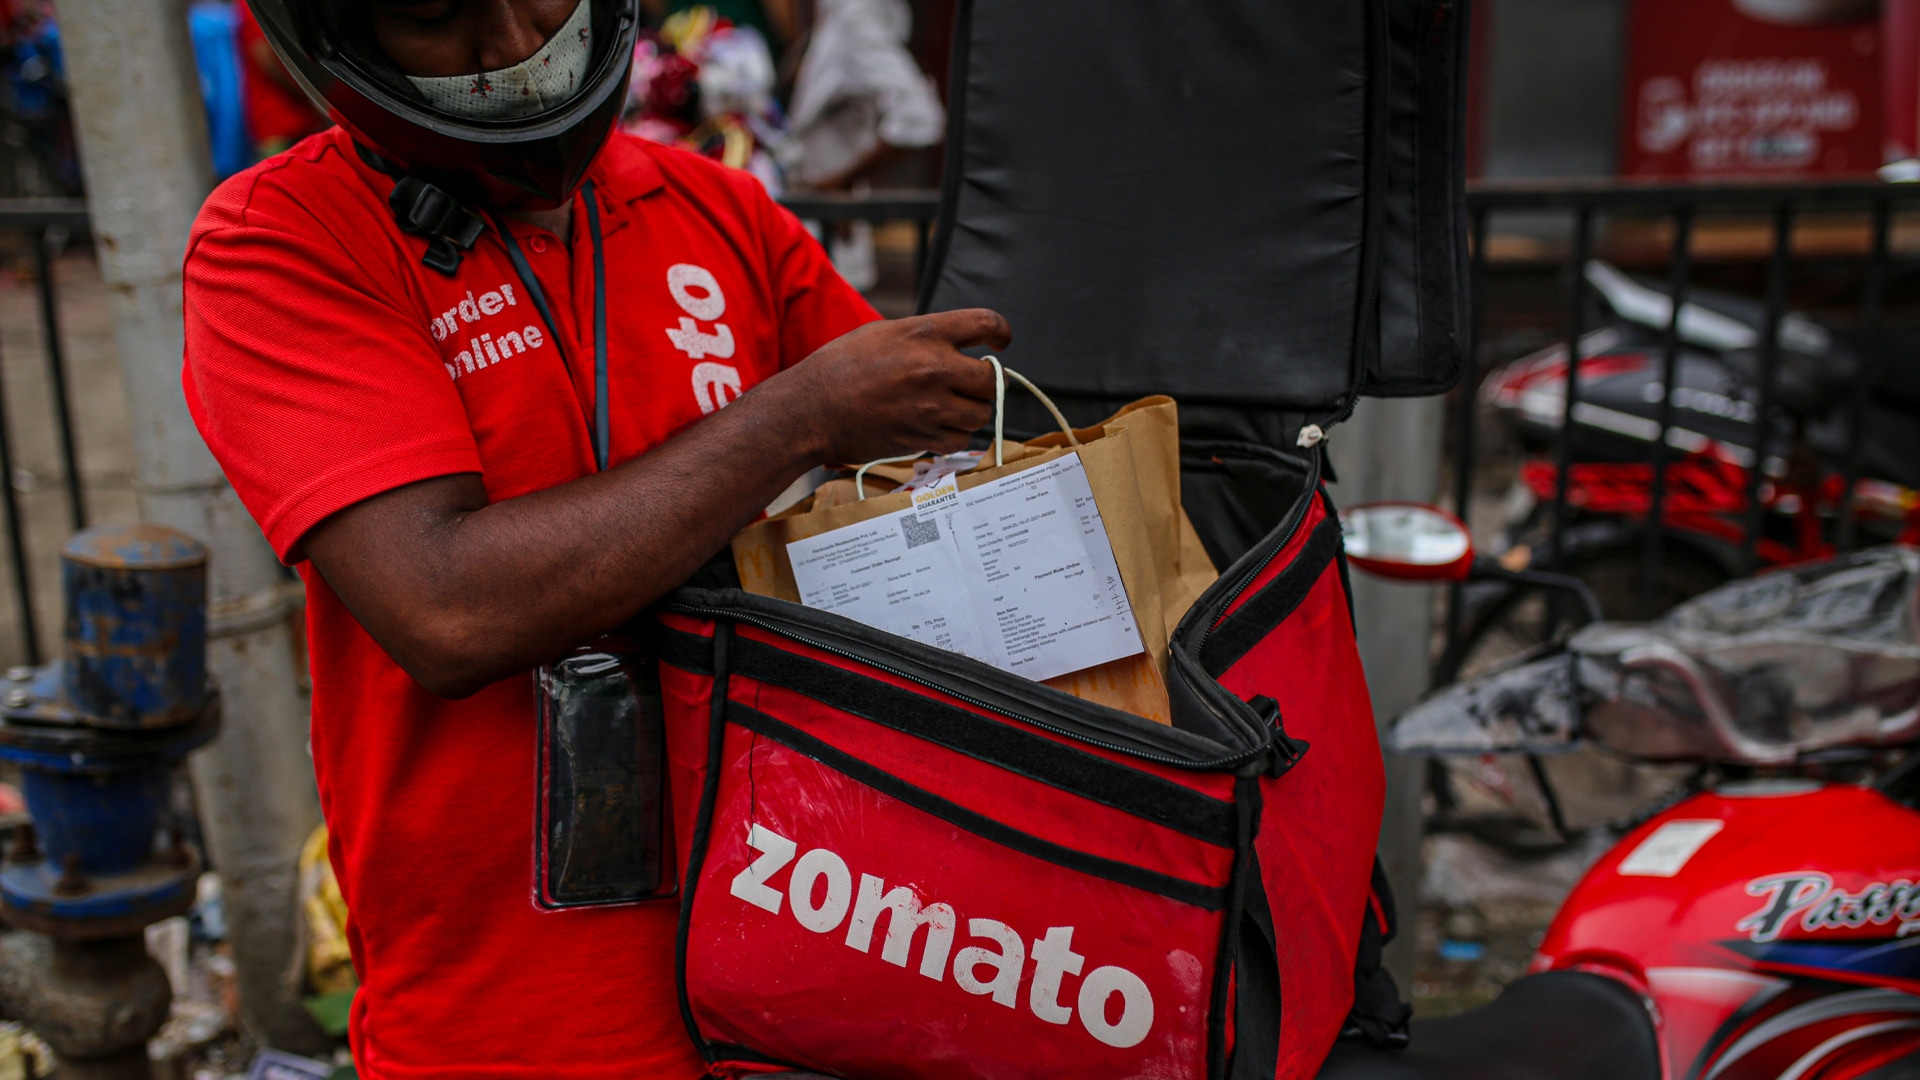 China’s Alipay pulls out of Zomato, sells its stake for $400 million, as per leaked term sheet